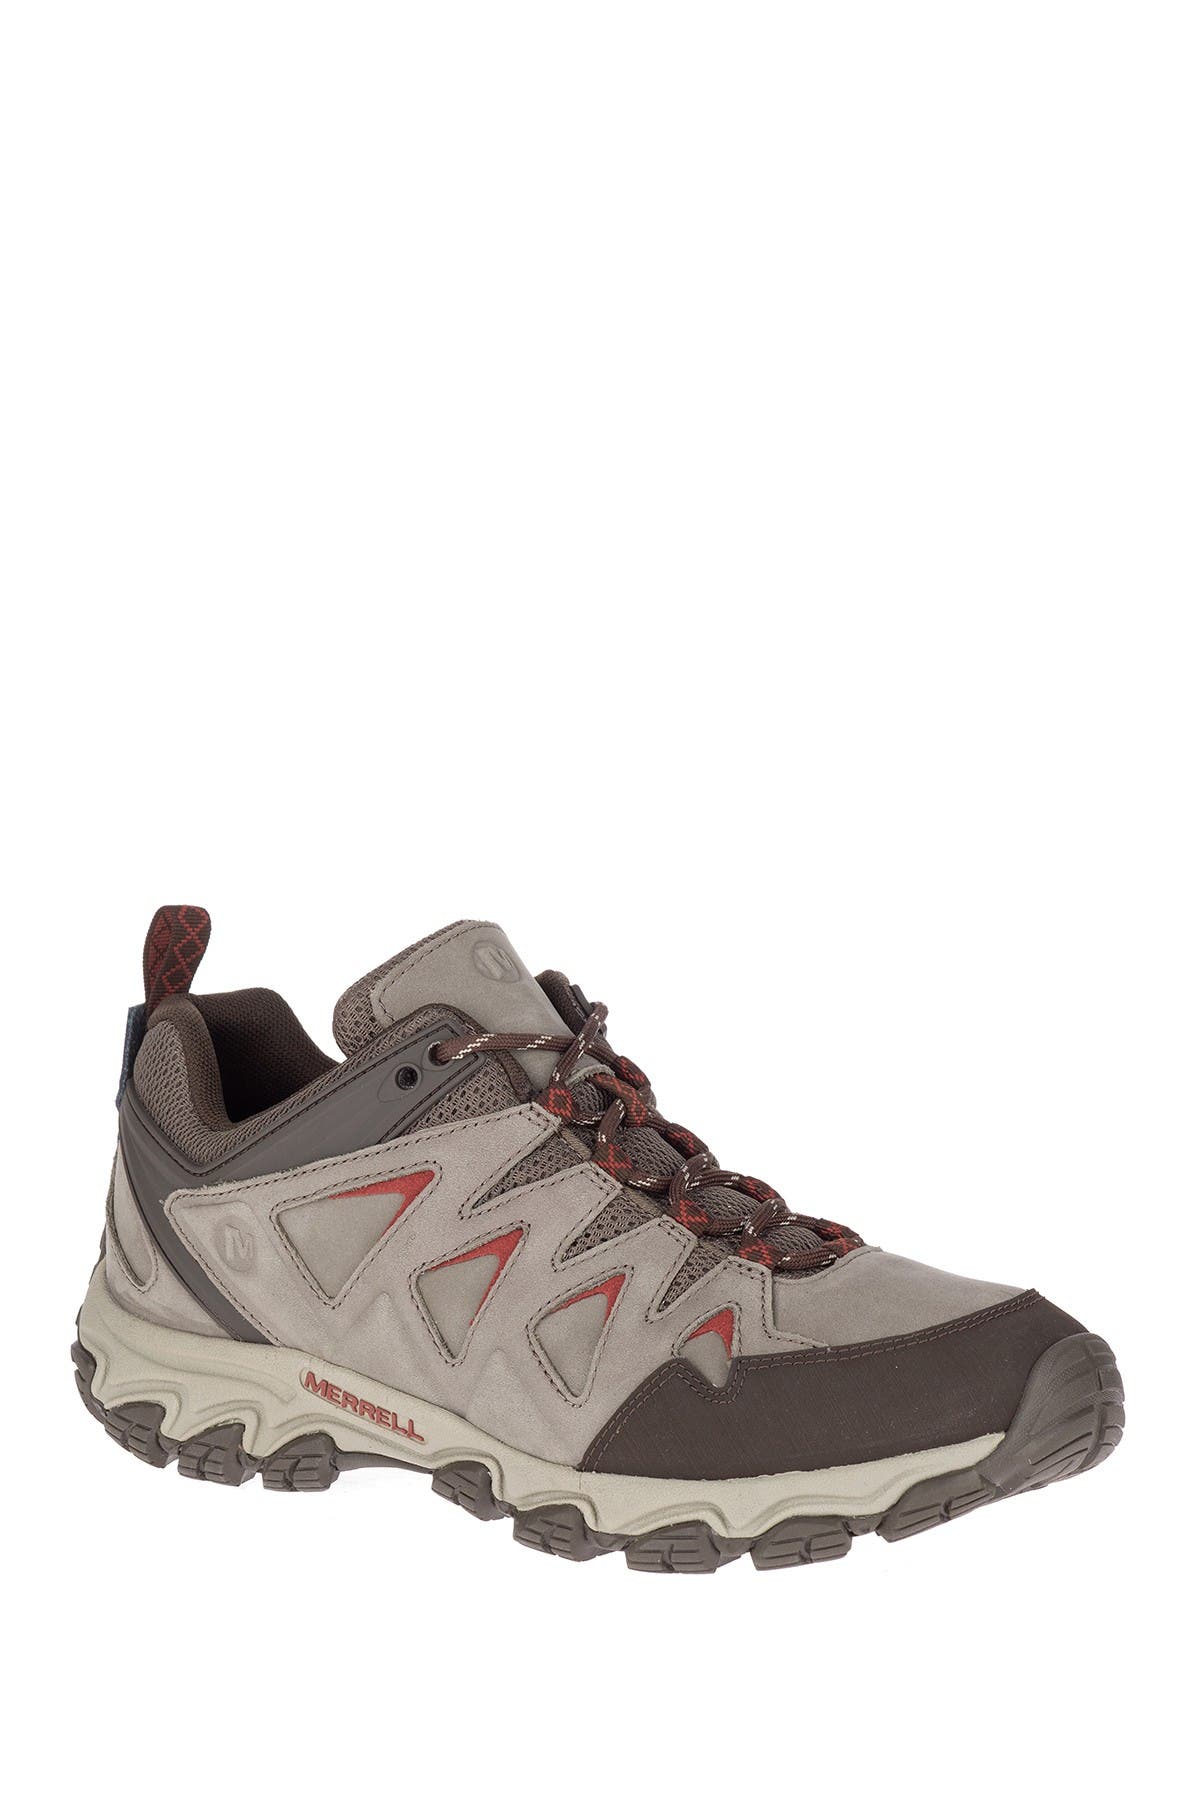 hiking shoes in wide widths